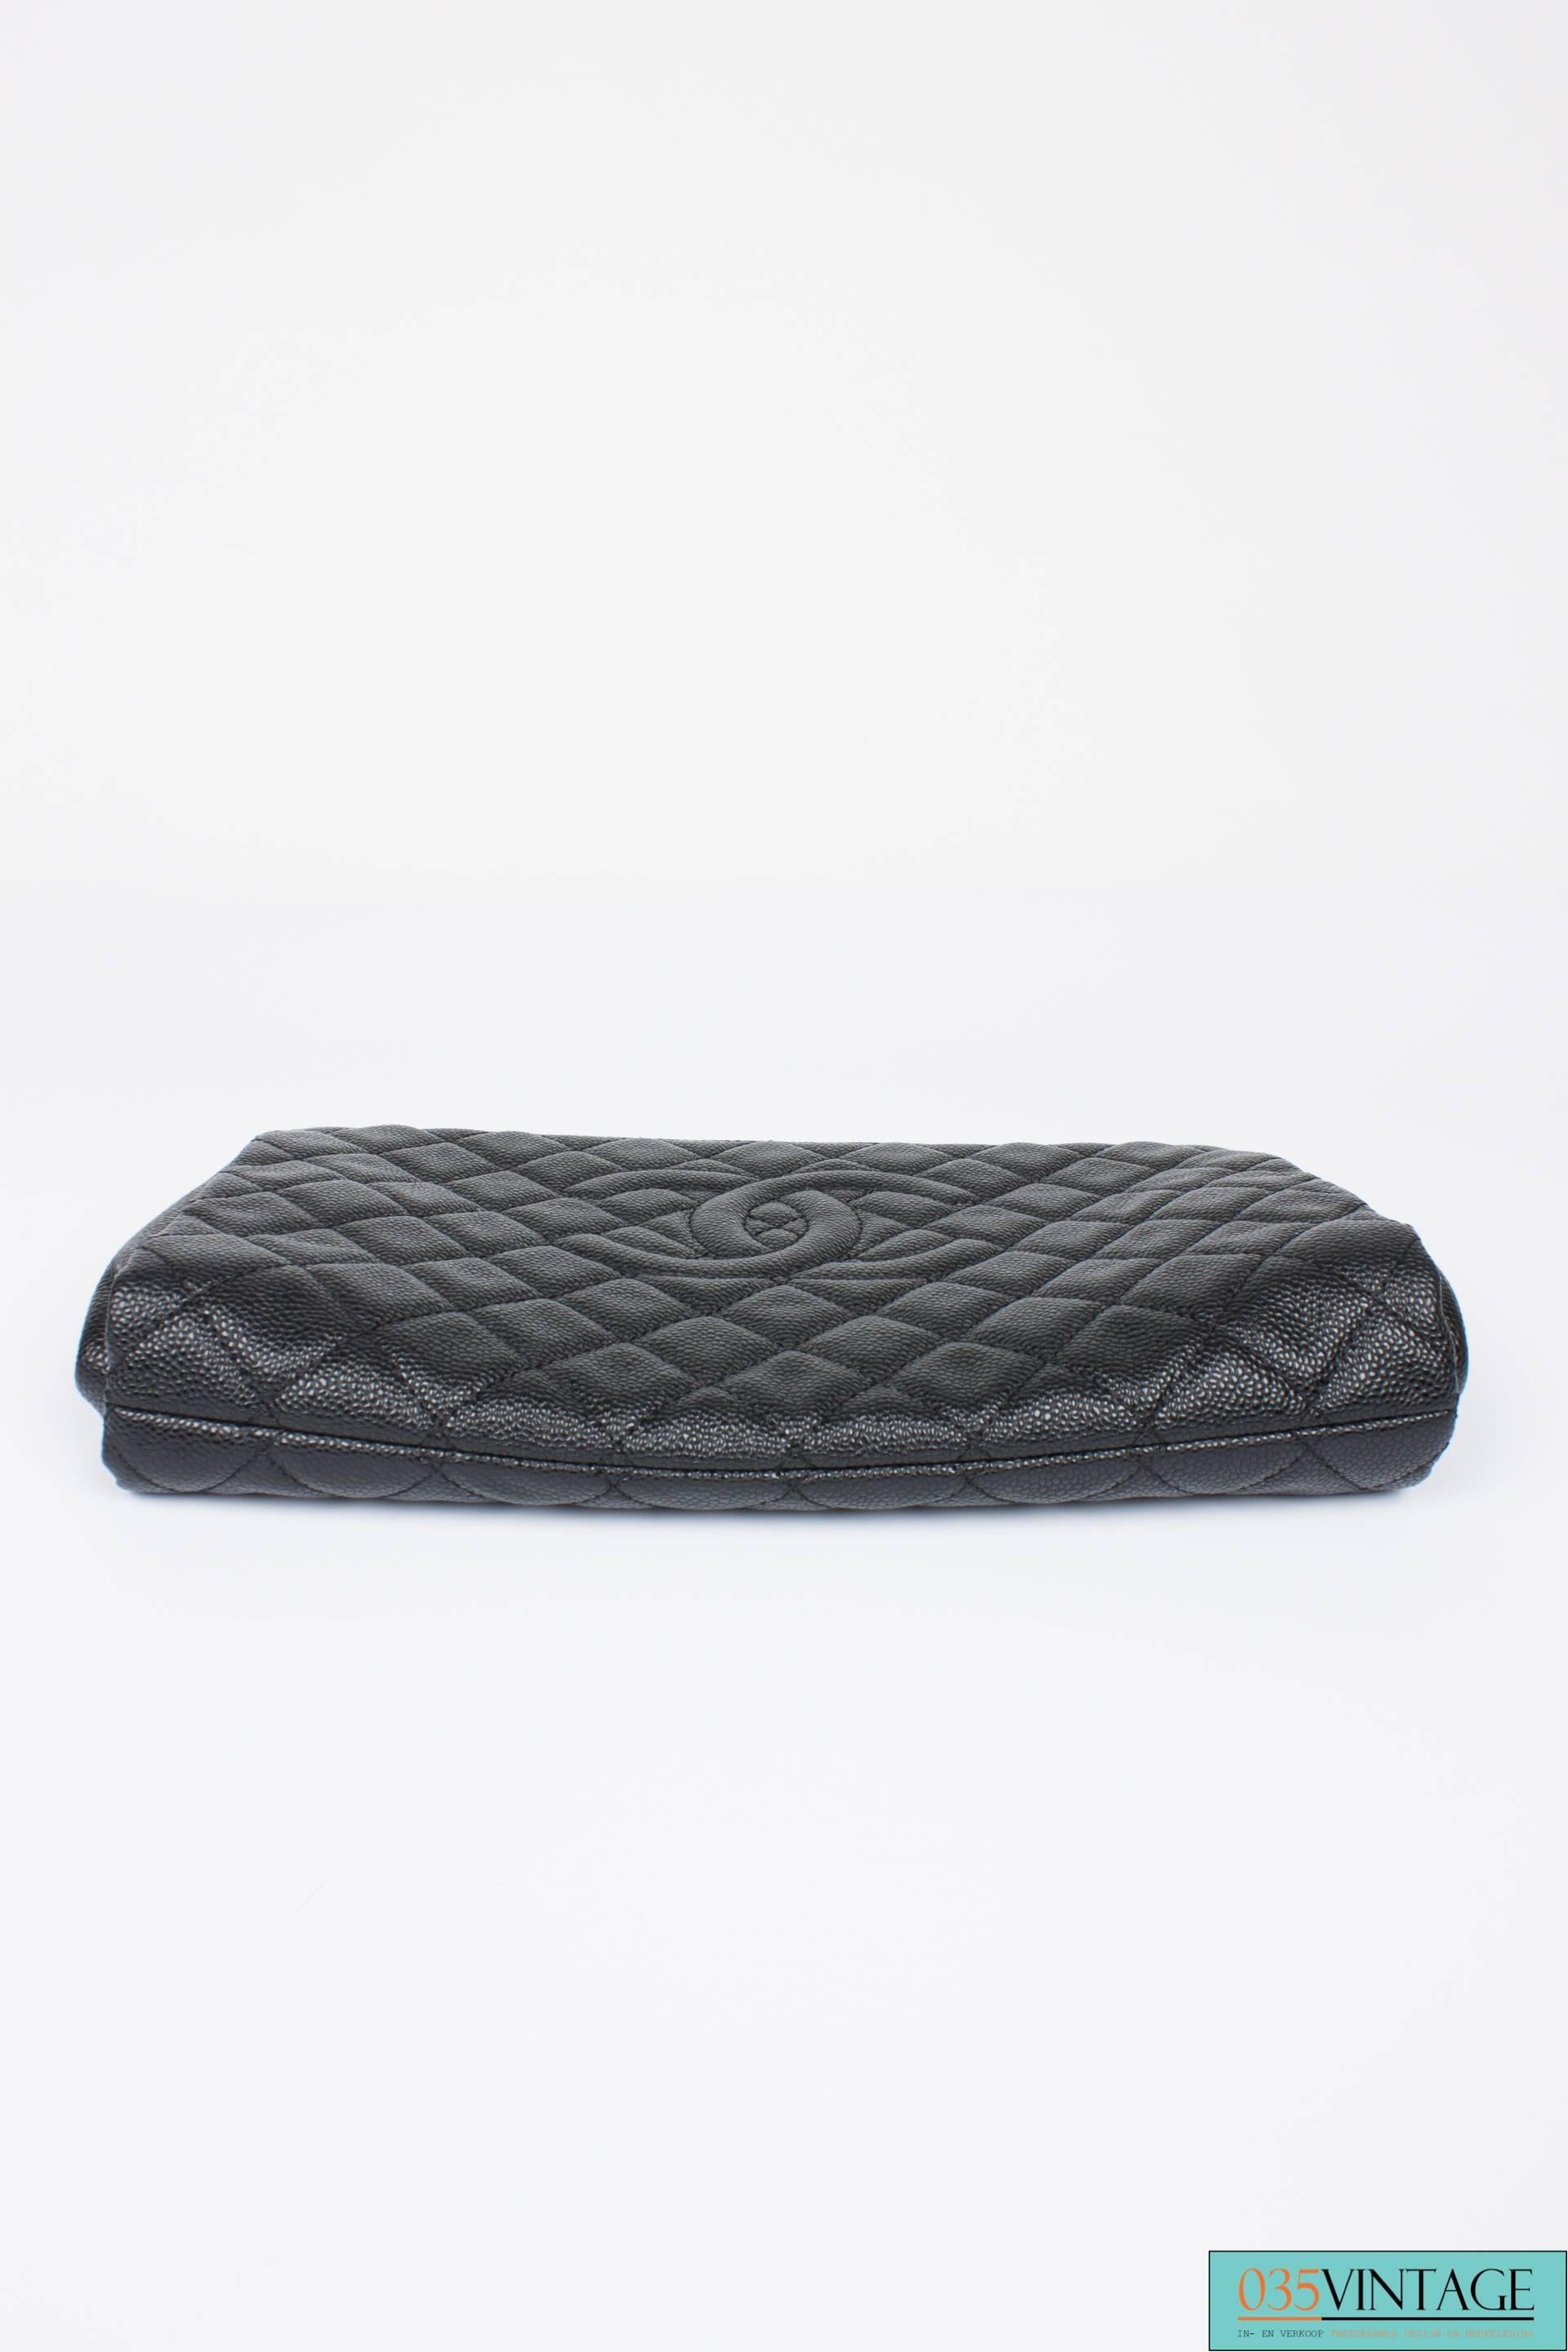 Sturdy and wonderfull clutch by Chanel; it is the Quilted Caviar Jumbo CC Clutch Bag.

The caviar leather is firm, but yet soft and fully quilted. A very large embroidered CC logo on the front. At the top the frame opens with two magnetic snaps.